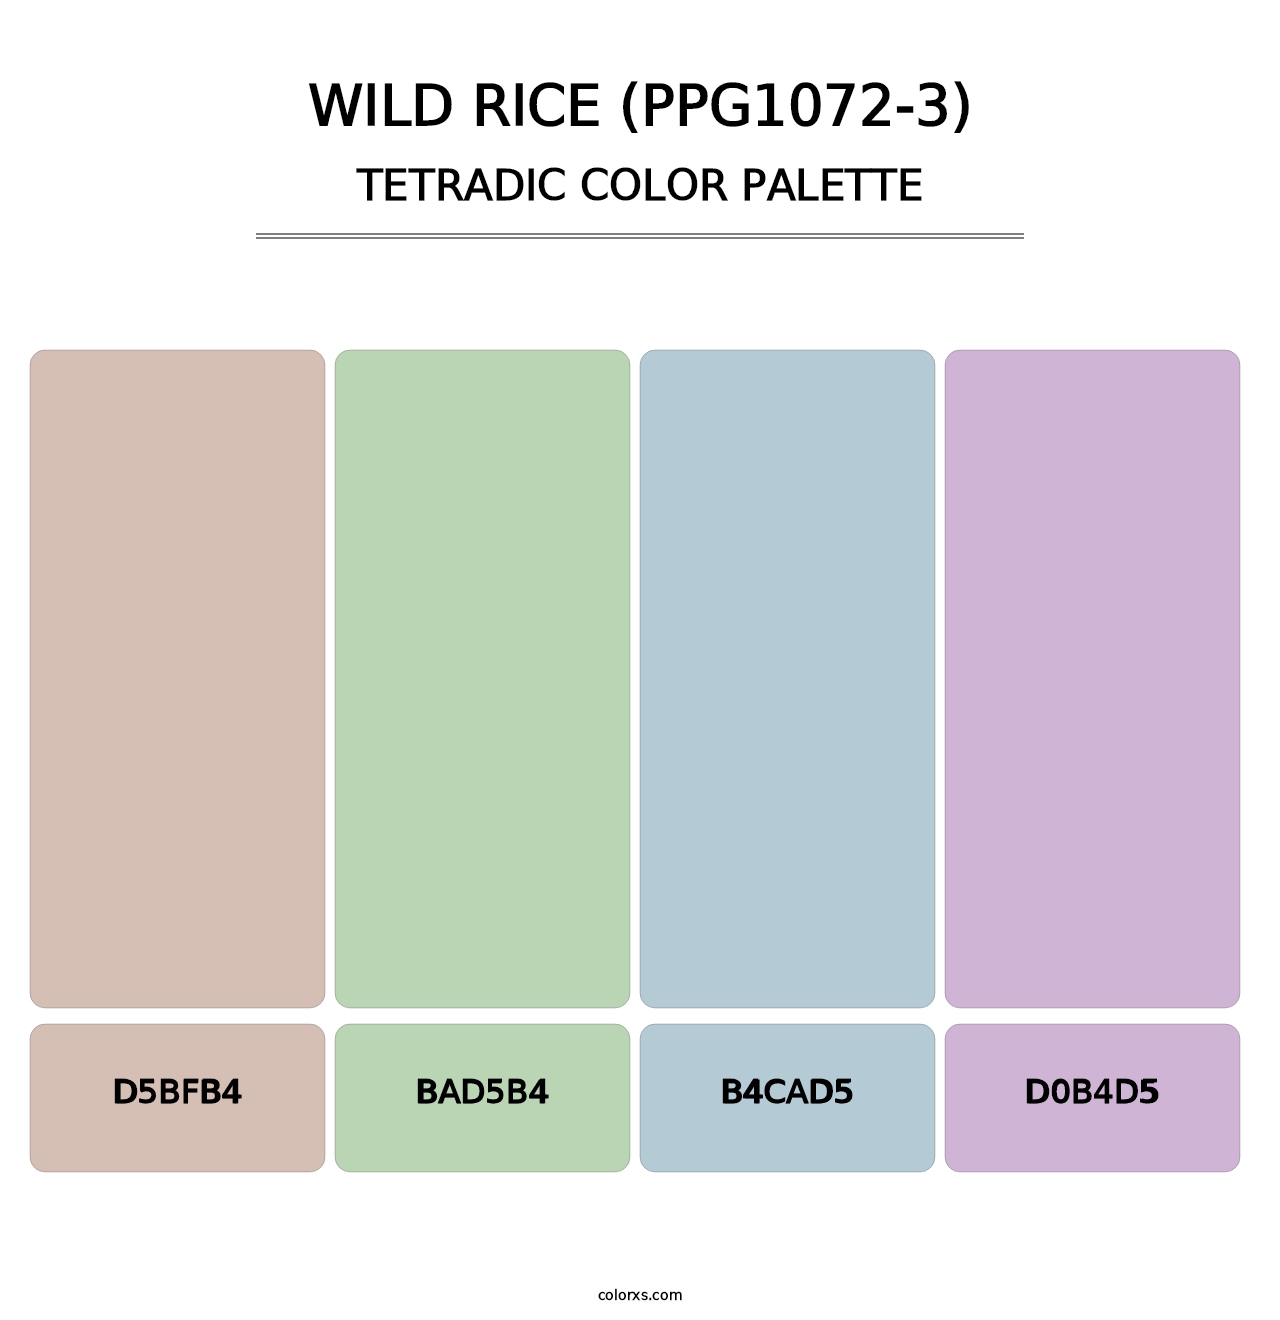 Wild Rice (PPG1072-3) - Tetradic Color Palette